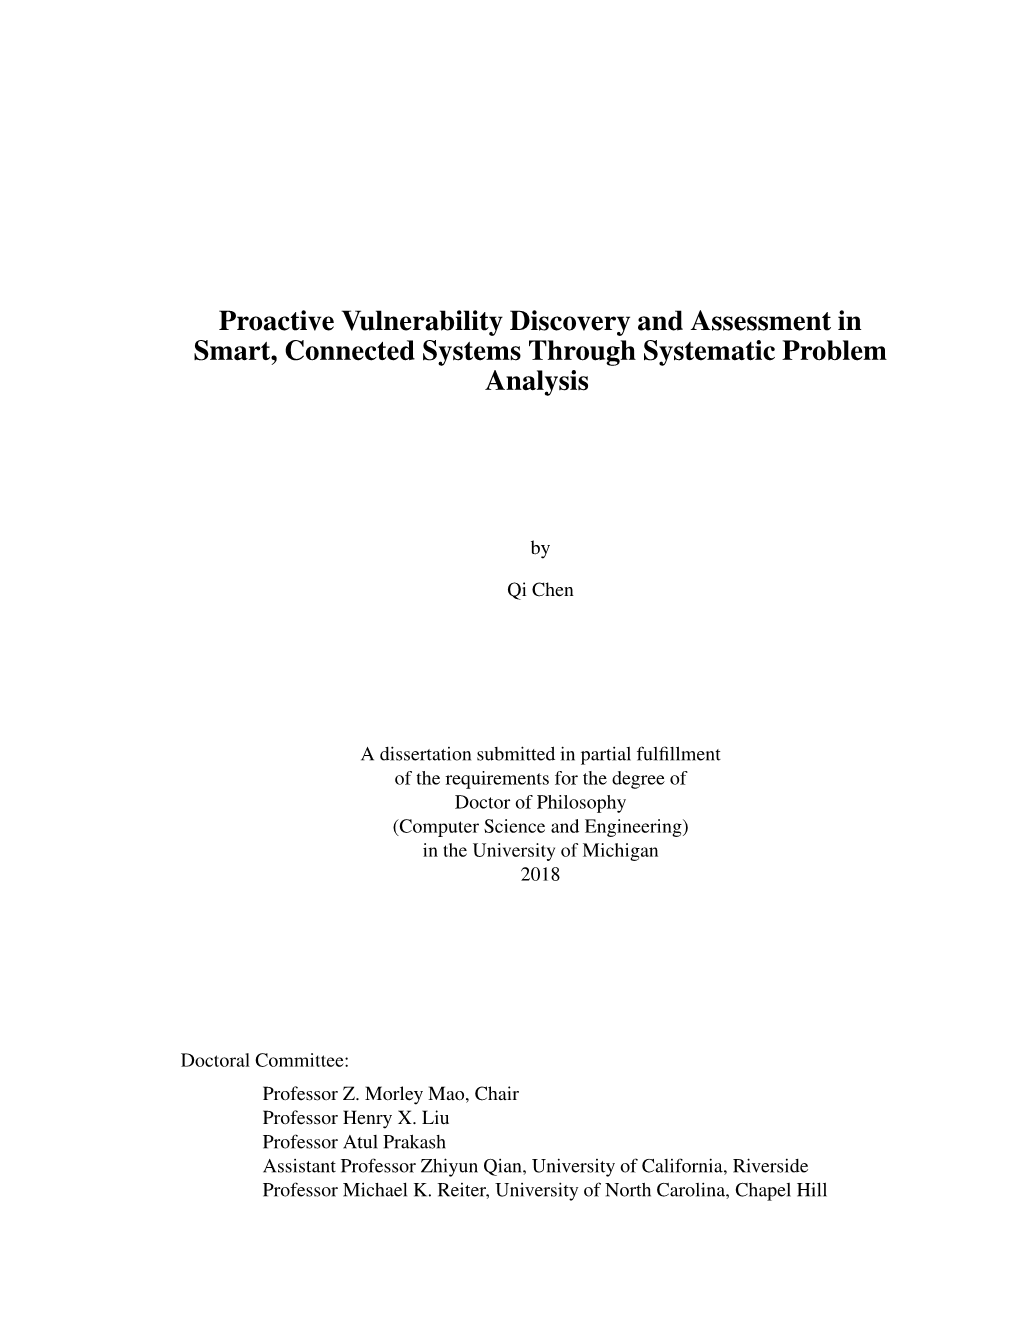 Proactive Vulnerability Discovery and Assessment in Smart, Connected Systems Through Systematic Problem Analysis